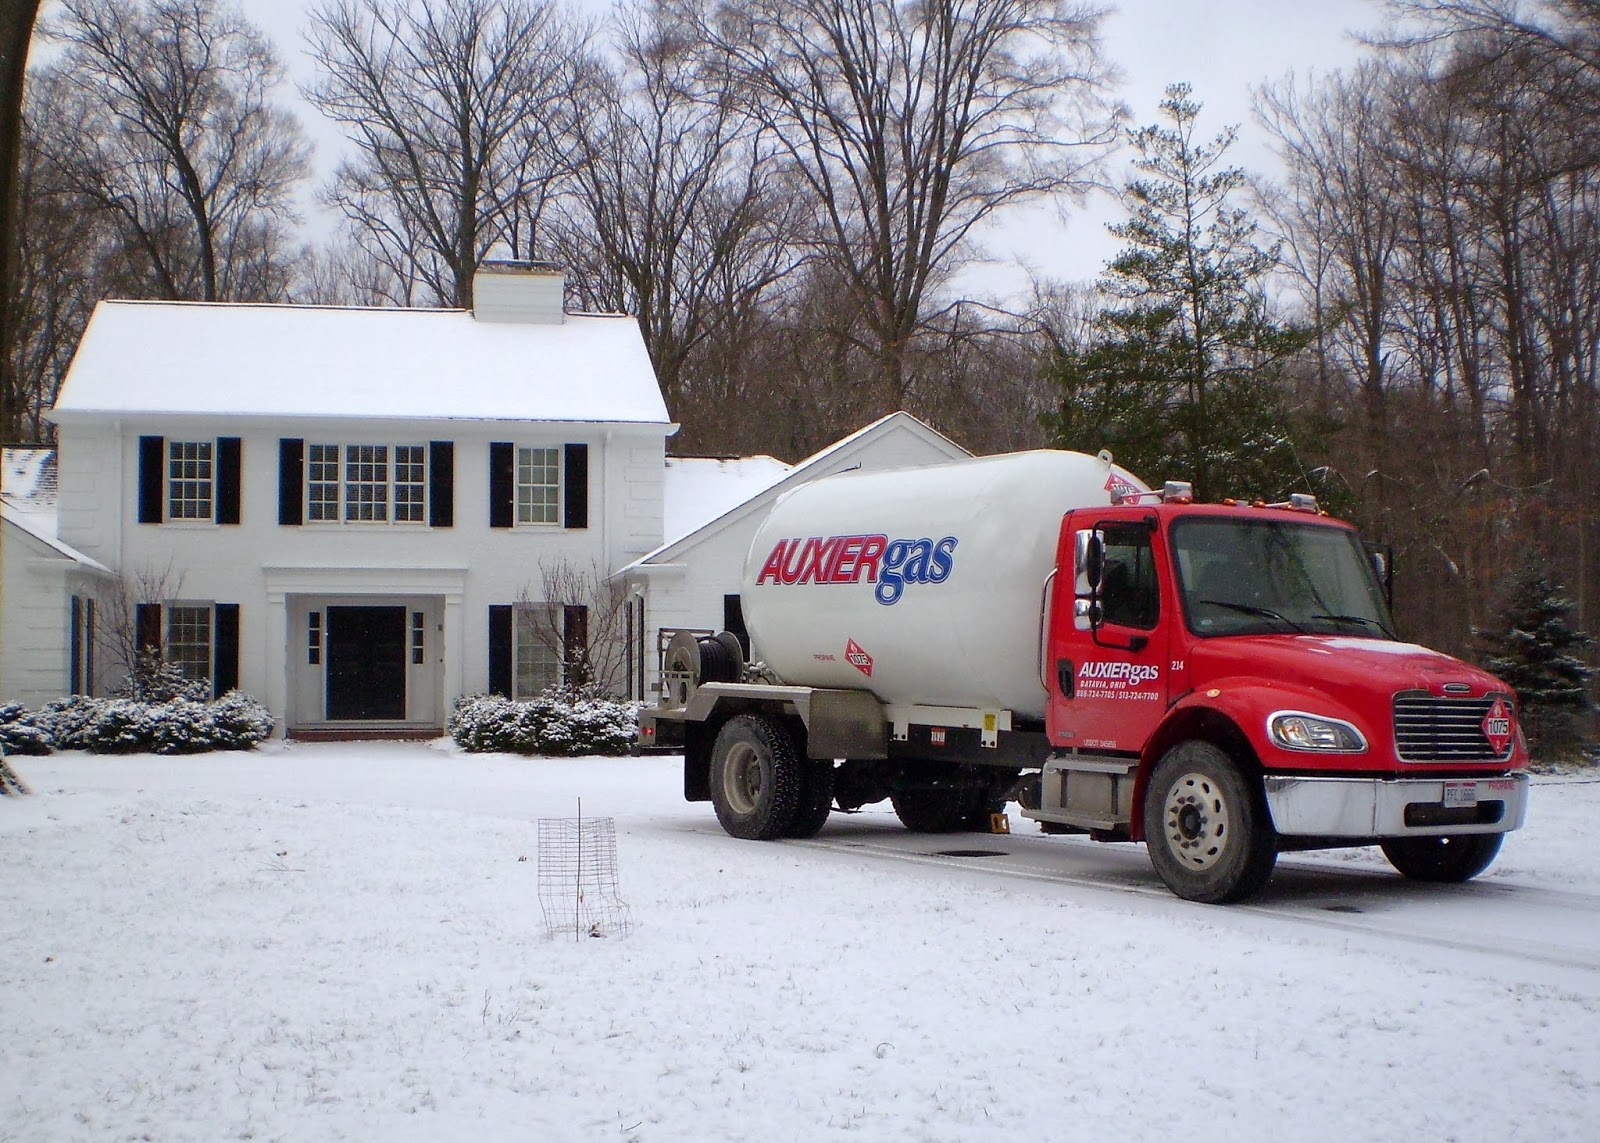 Image of Auxier Gas truck in front of house